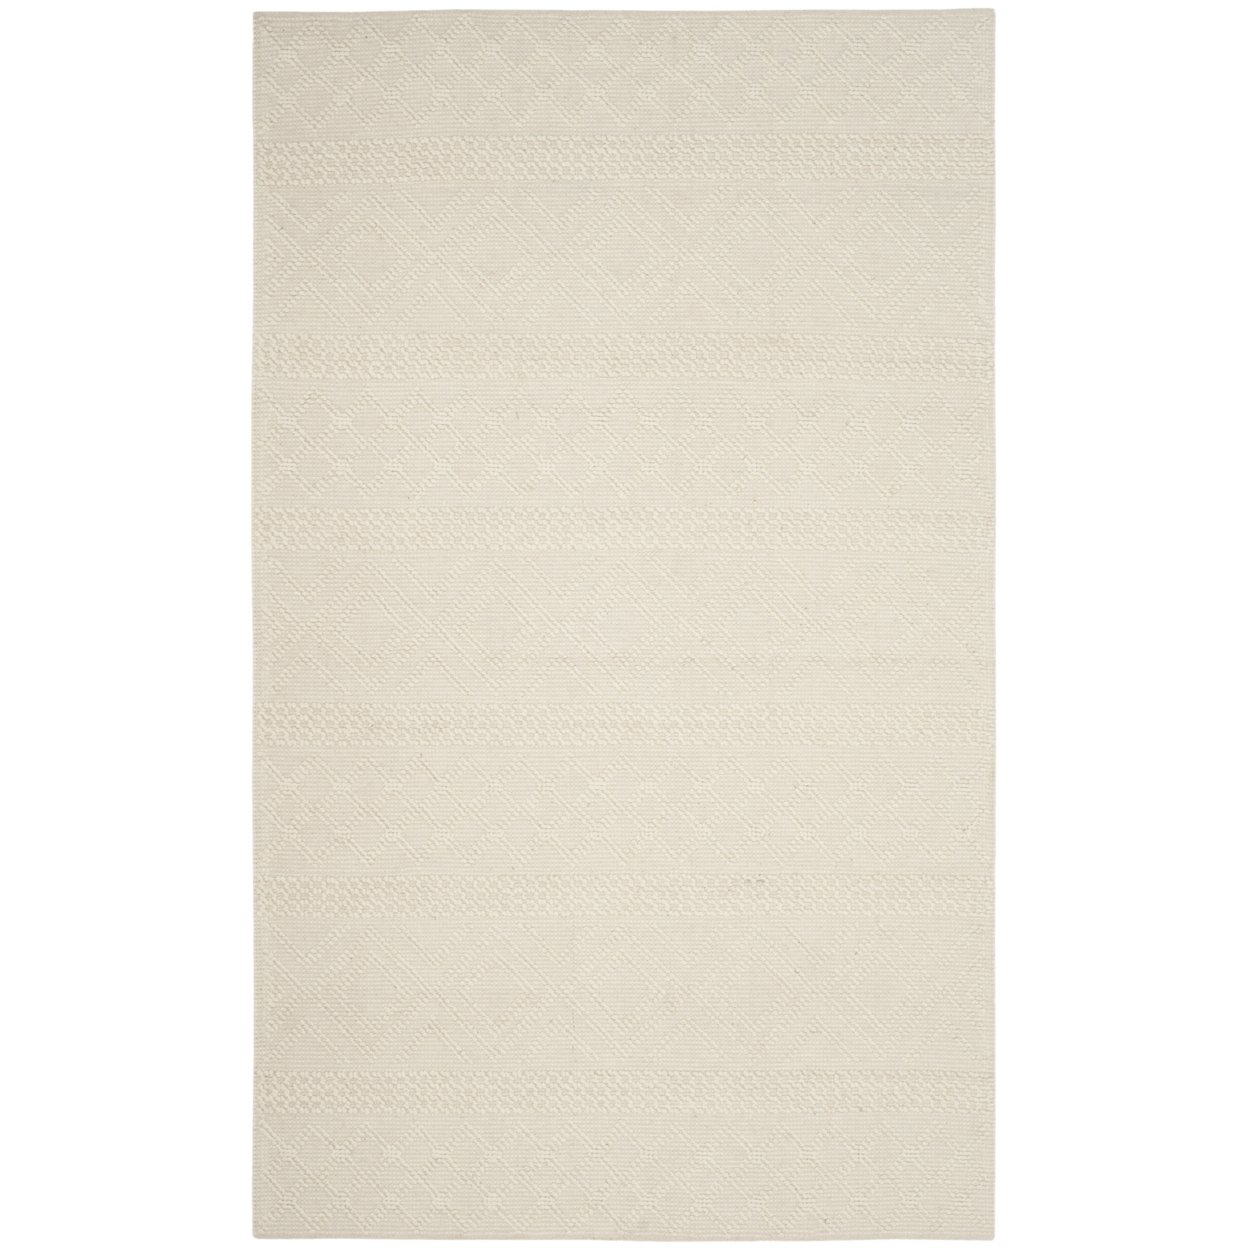 SAFAVIEH Vermont Collection VRM211A Handwoven Ivory Rug - 4 X 6